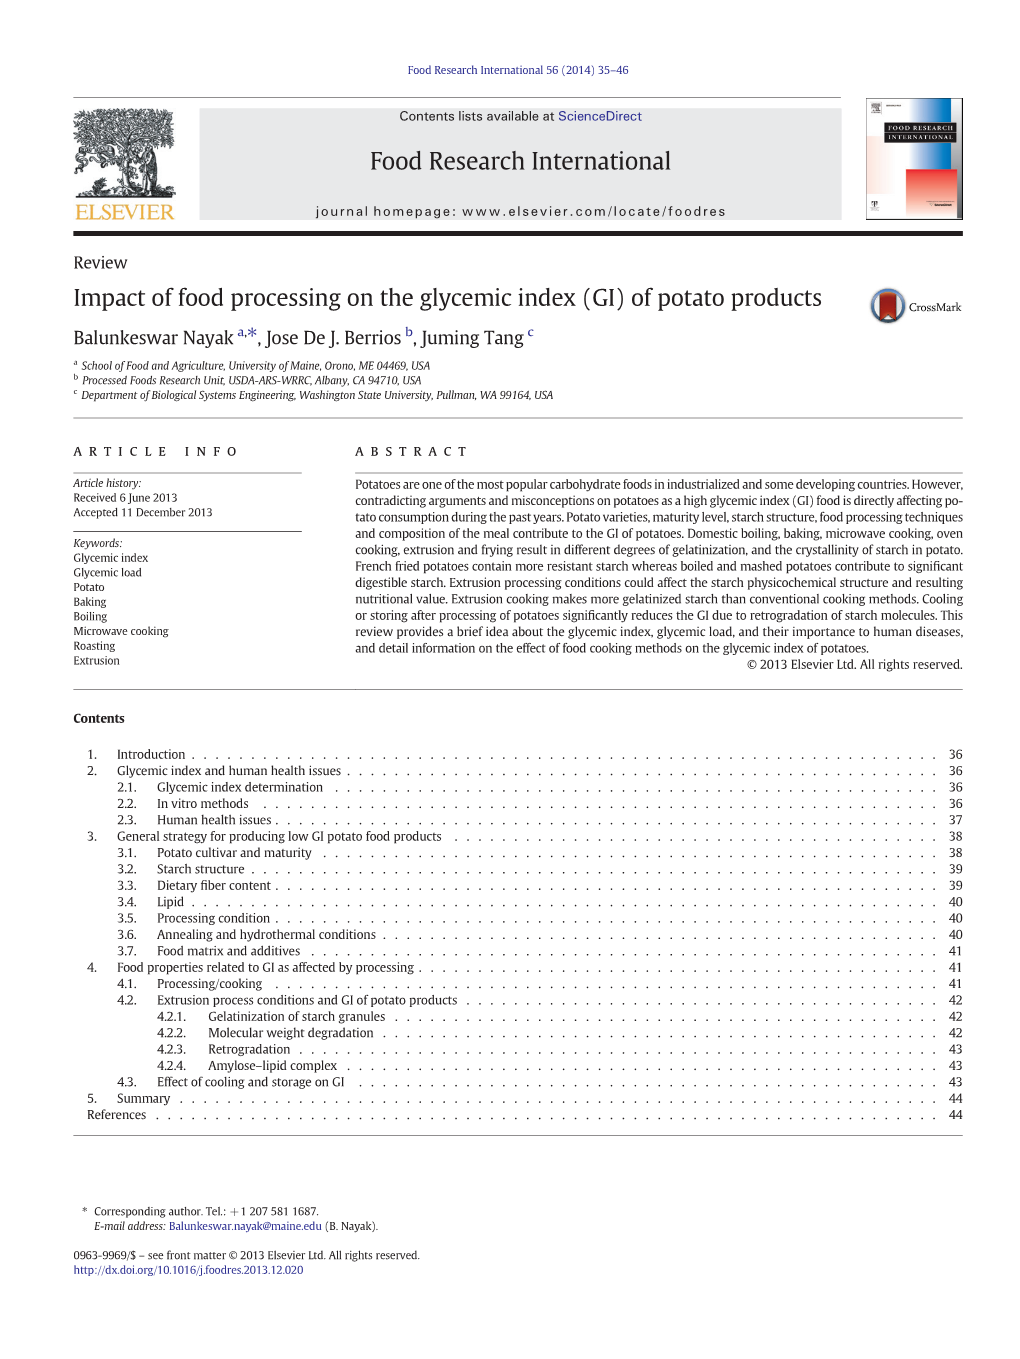 Impact of Food Processing on the Glycemic Index (GI) of Potato Products